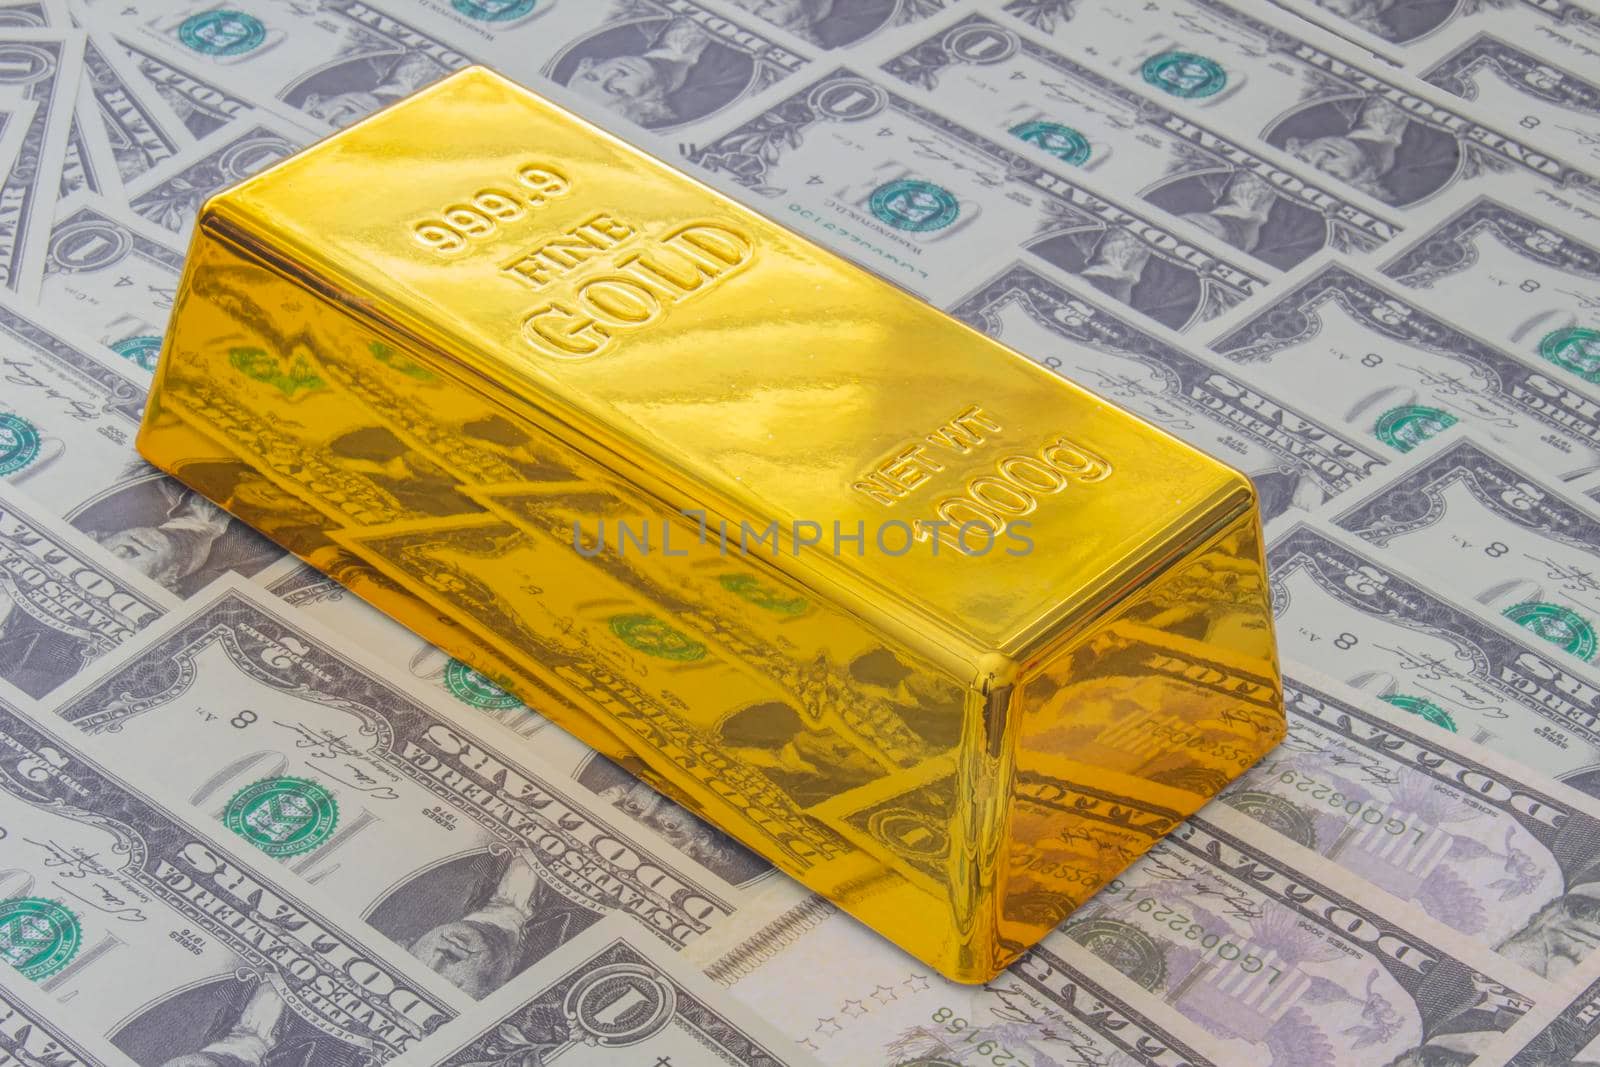 Calgary, Alberta, Canada. April 10, 2021. A Gold Bar or Golden Brick Bullion on American USA currency. by oasisamuel